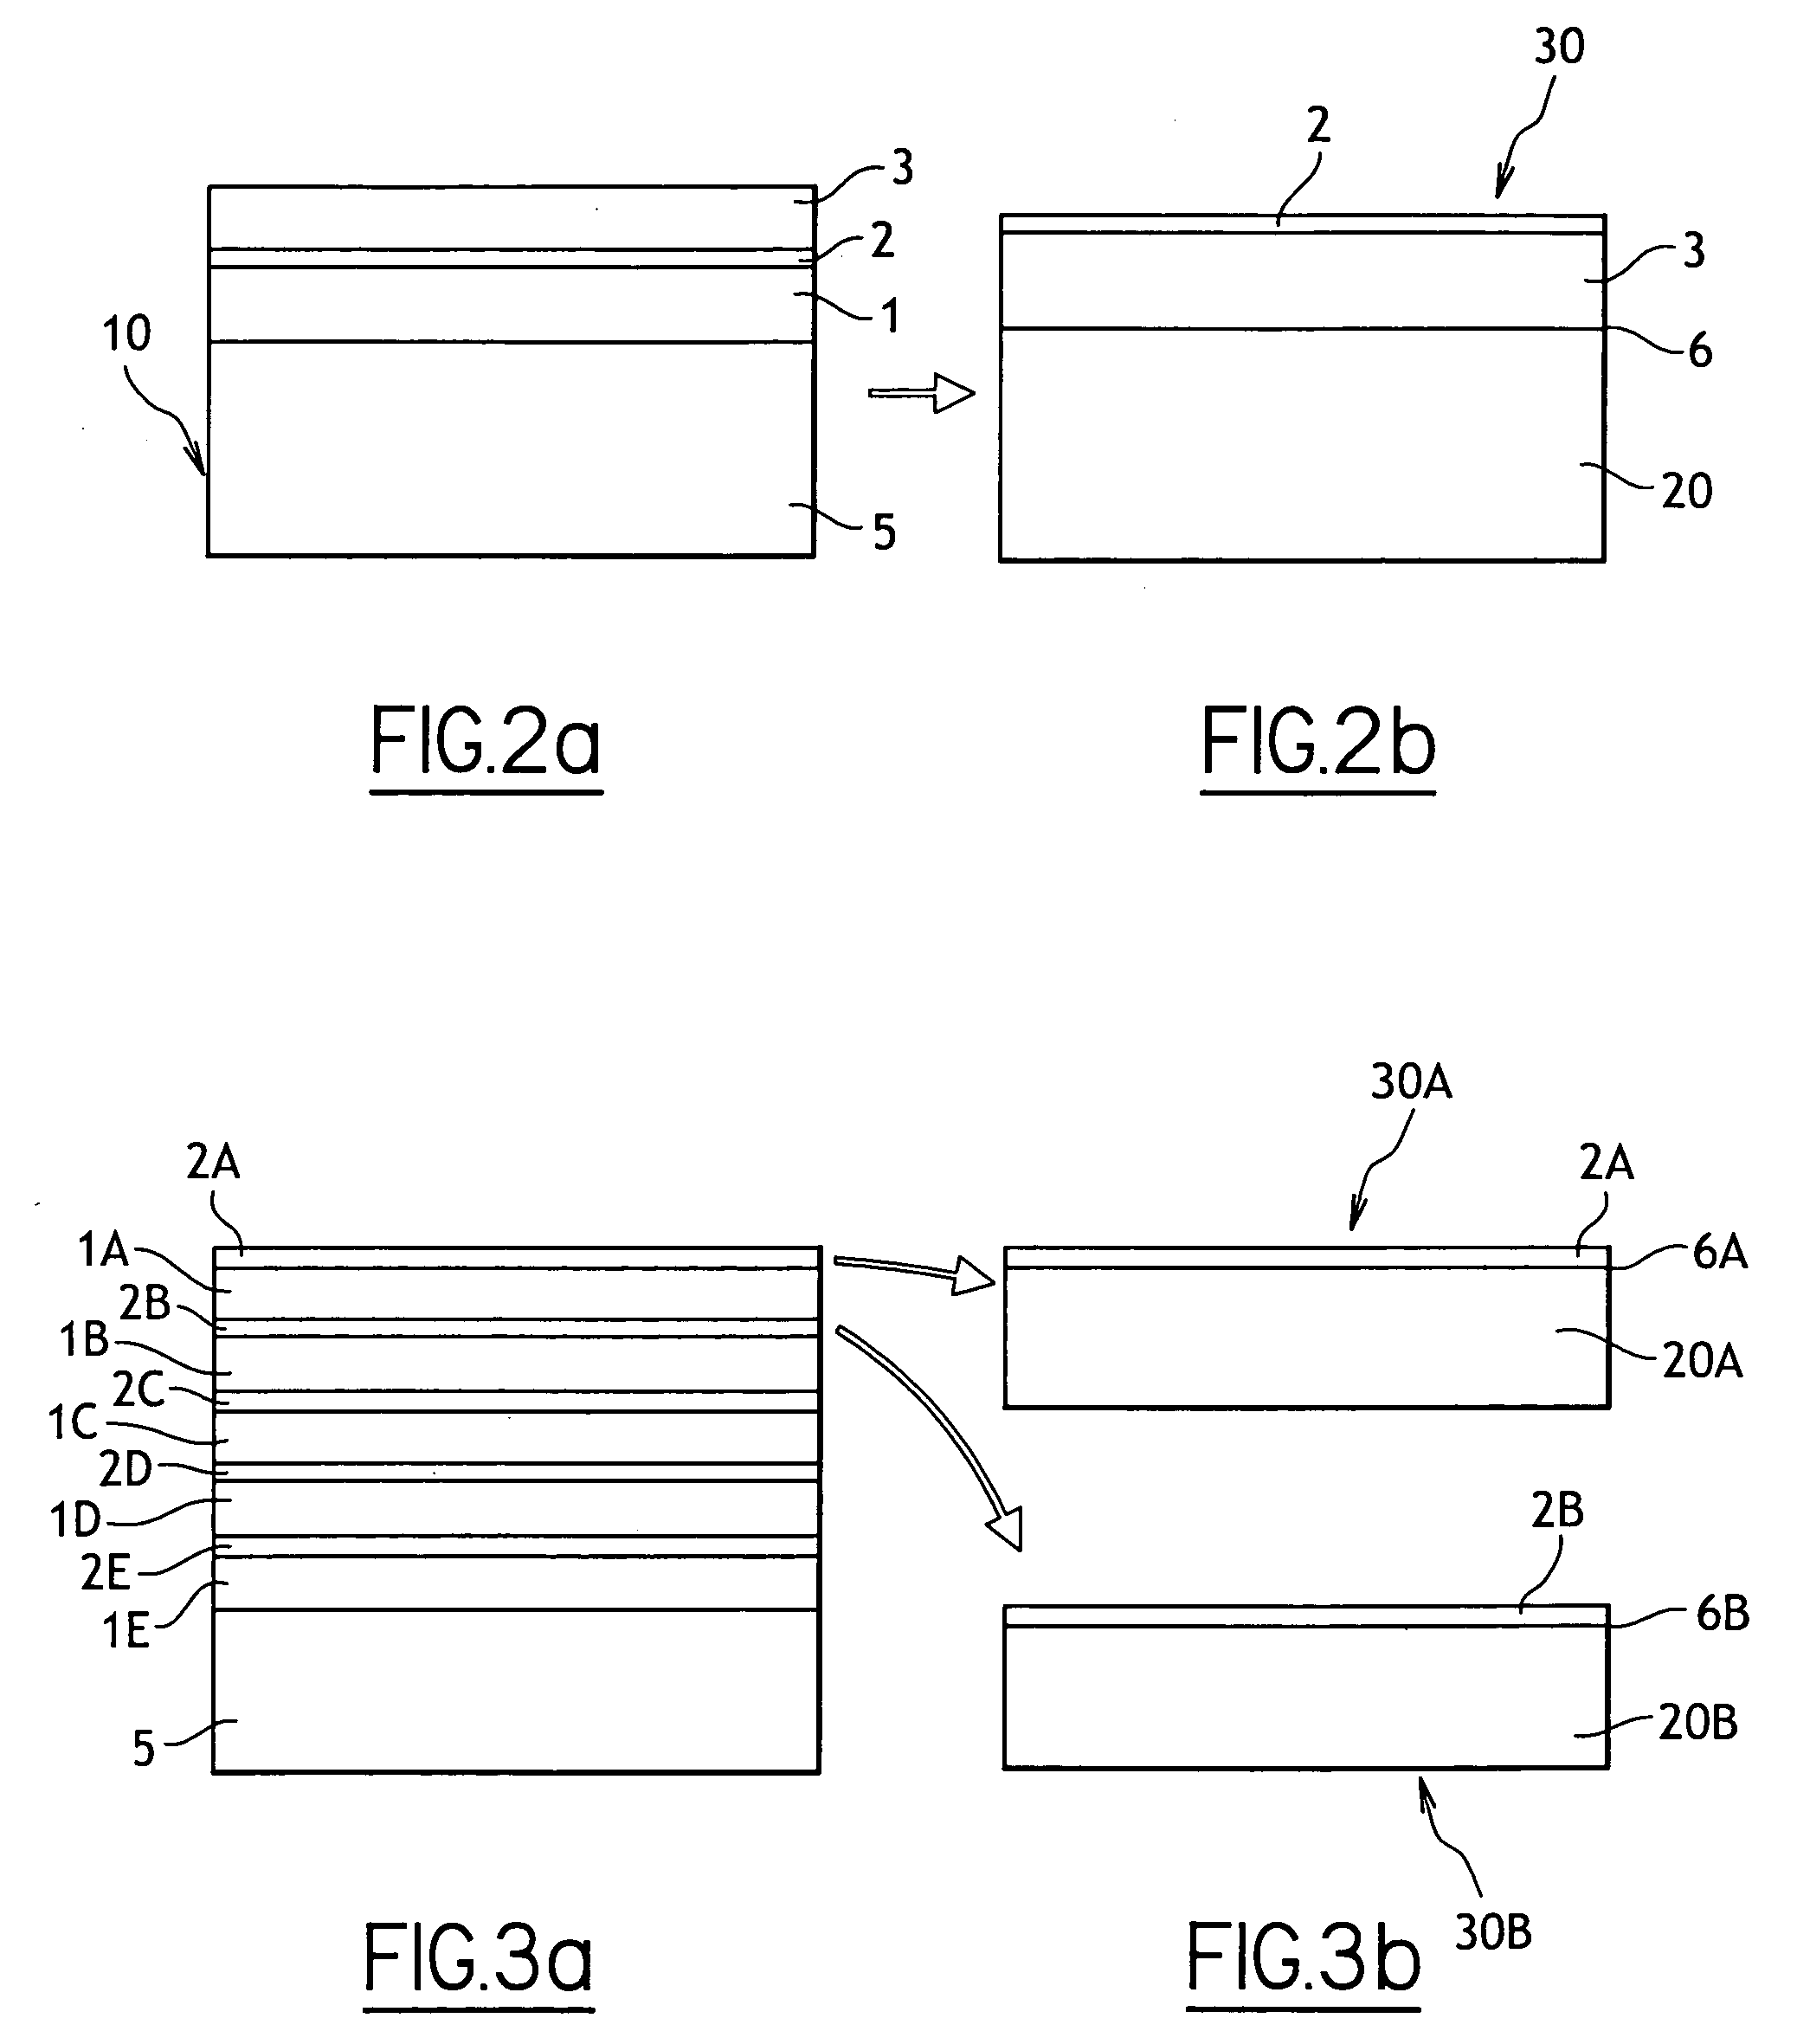 Treatment of a removed layer of silicon-germanium